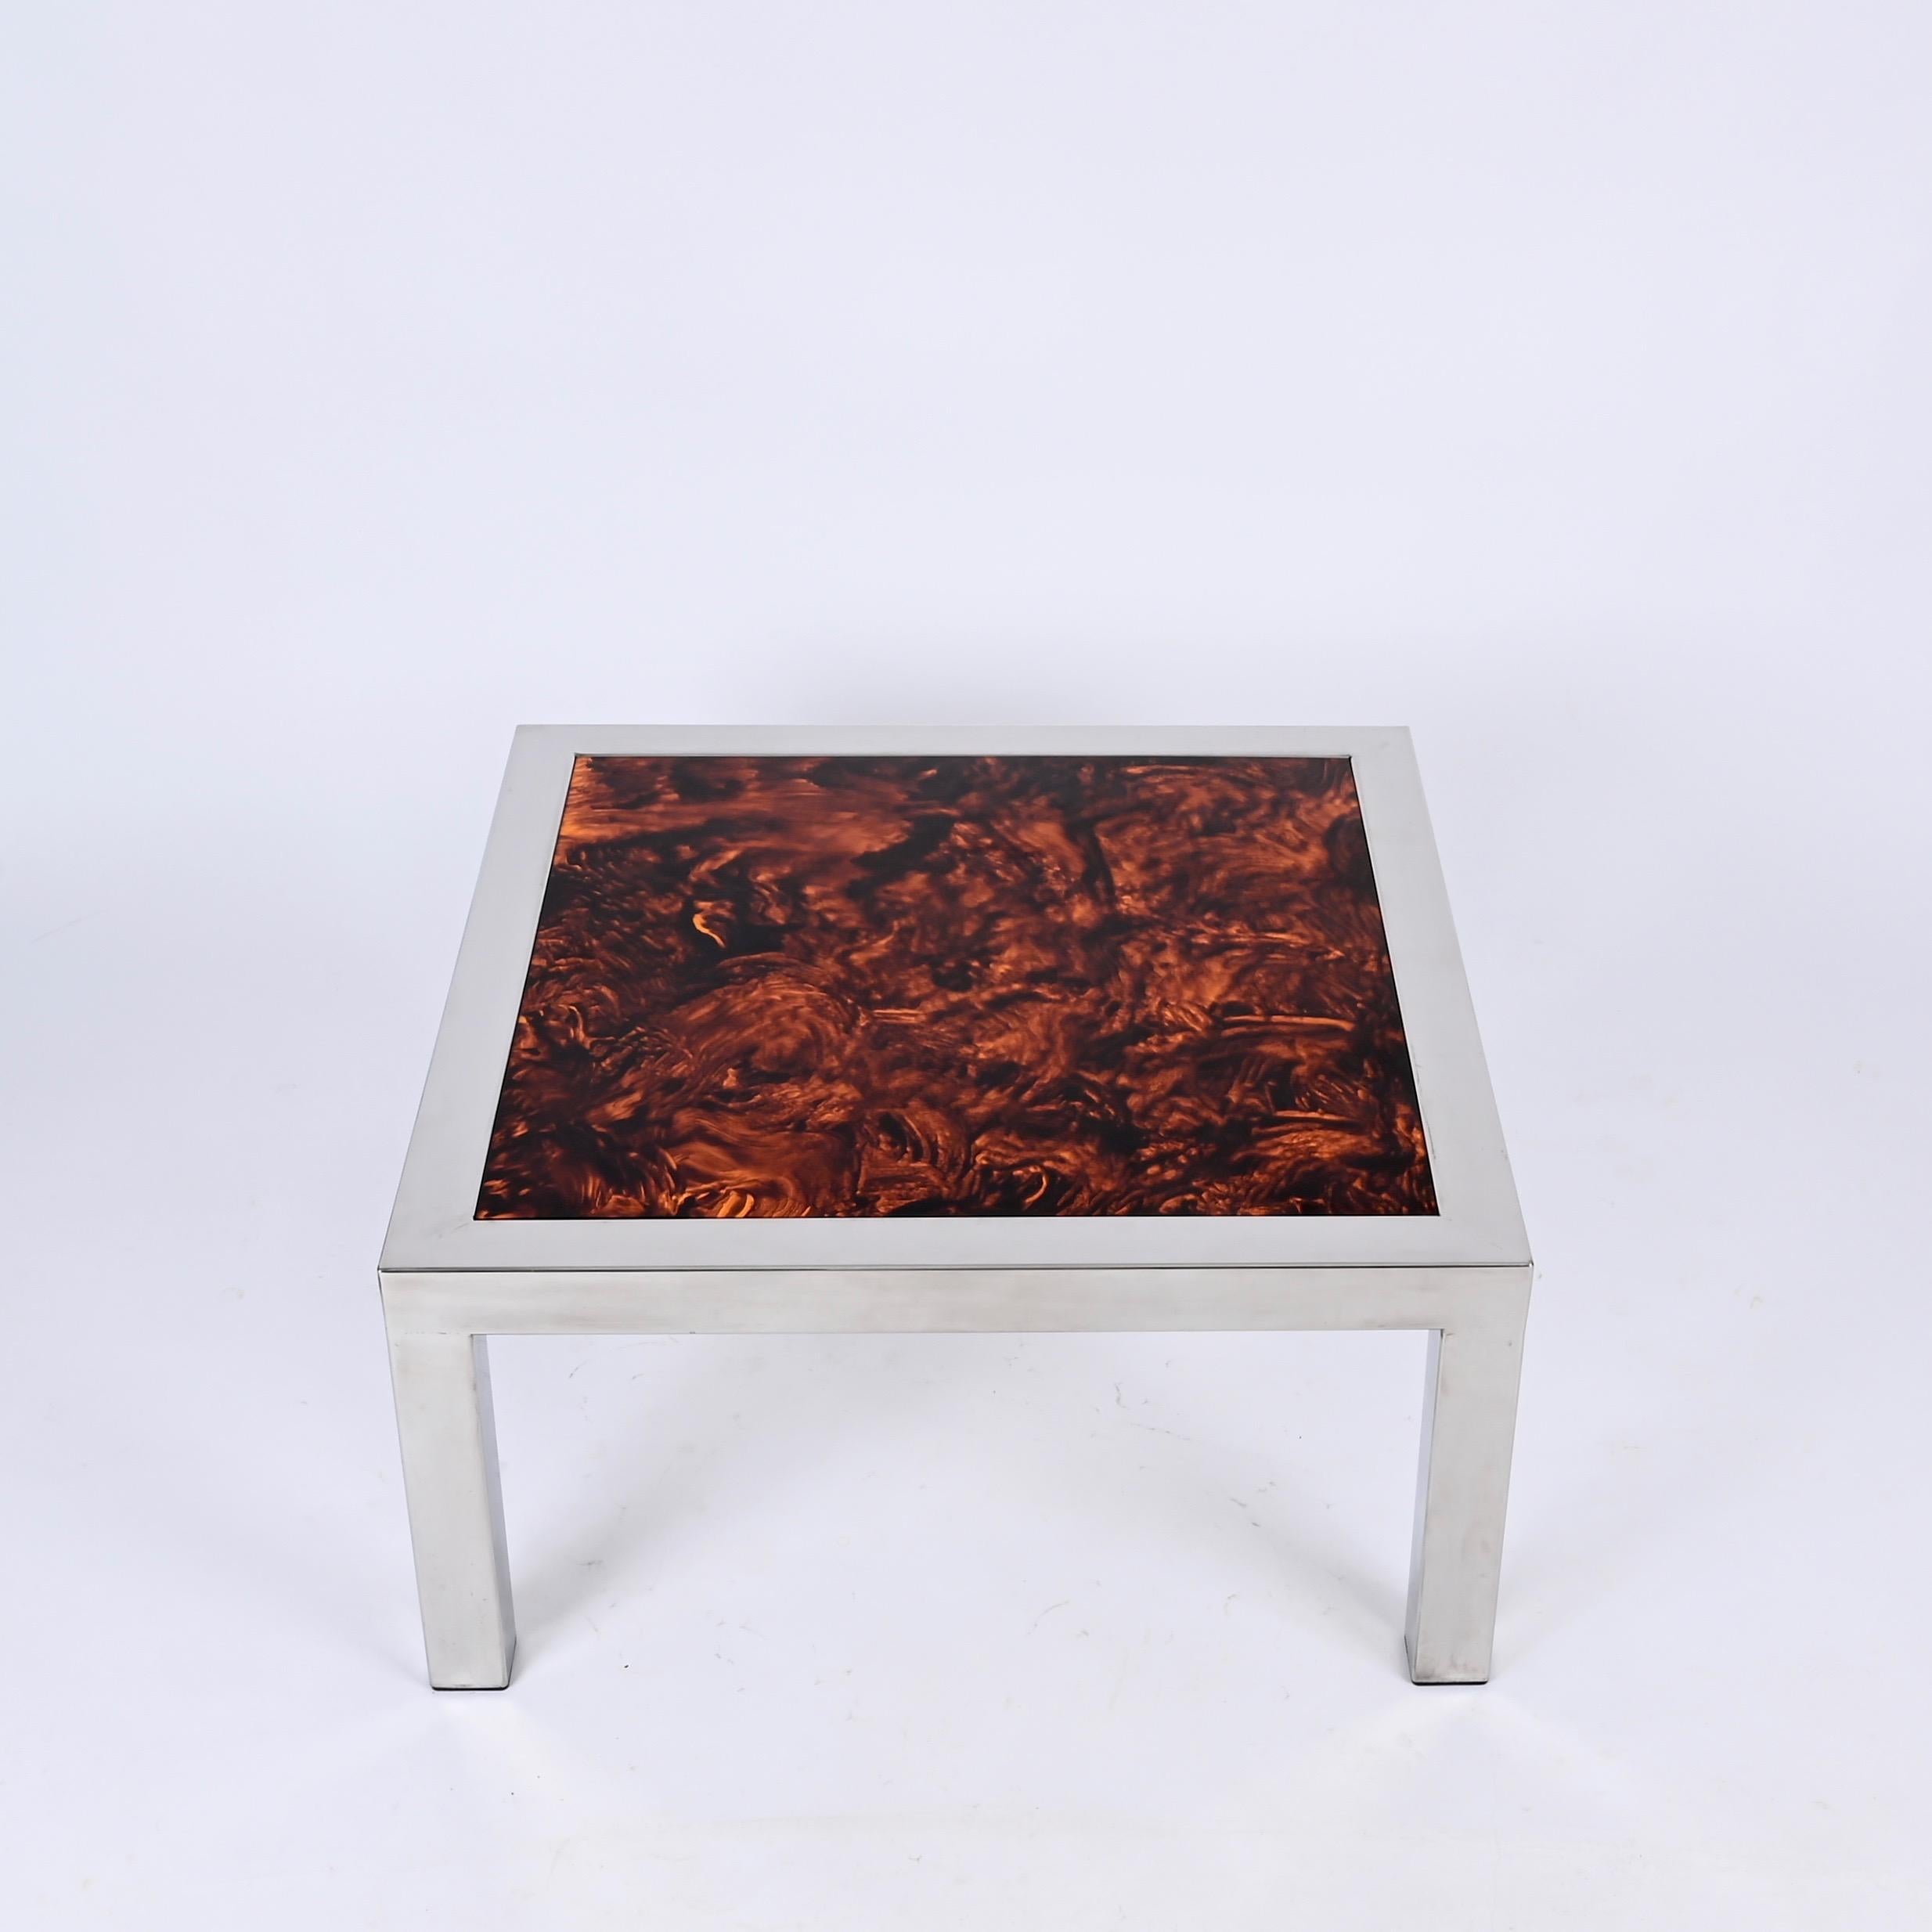 Hand-Crafted Chromed Steel and Tortoiseshell Effect Lucite Square Coffee Table, Italy 1970s For Sale